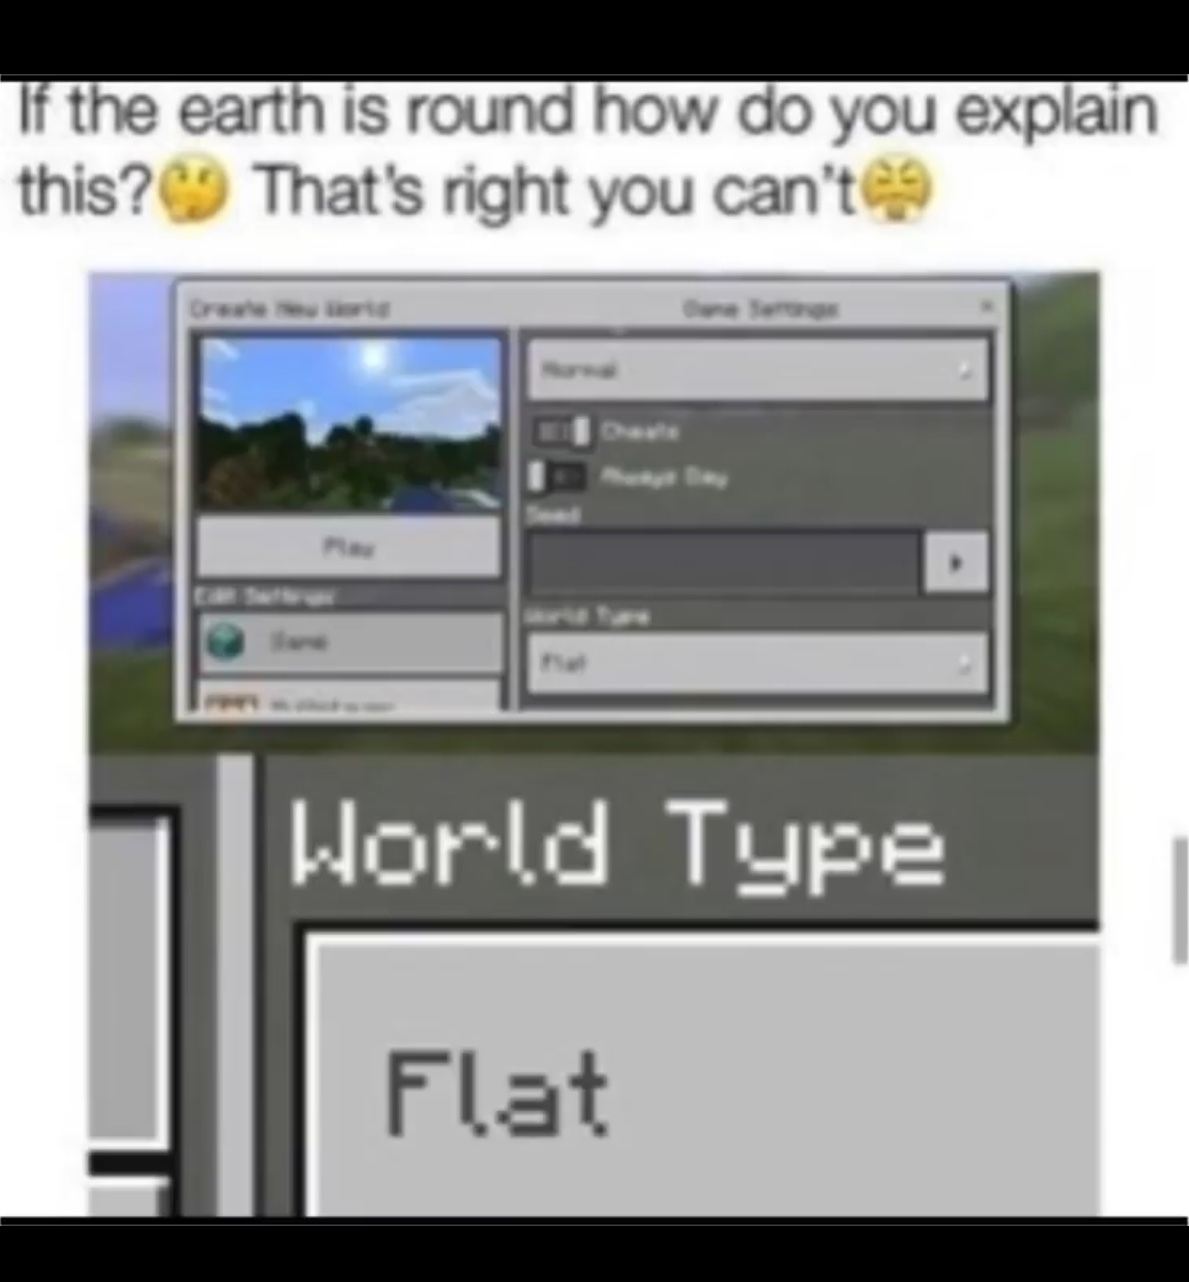 checkmate round earthers - meme